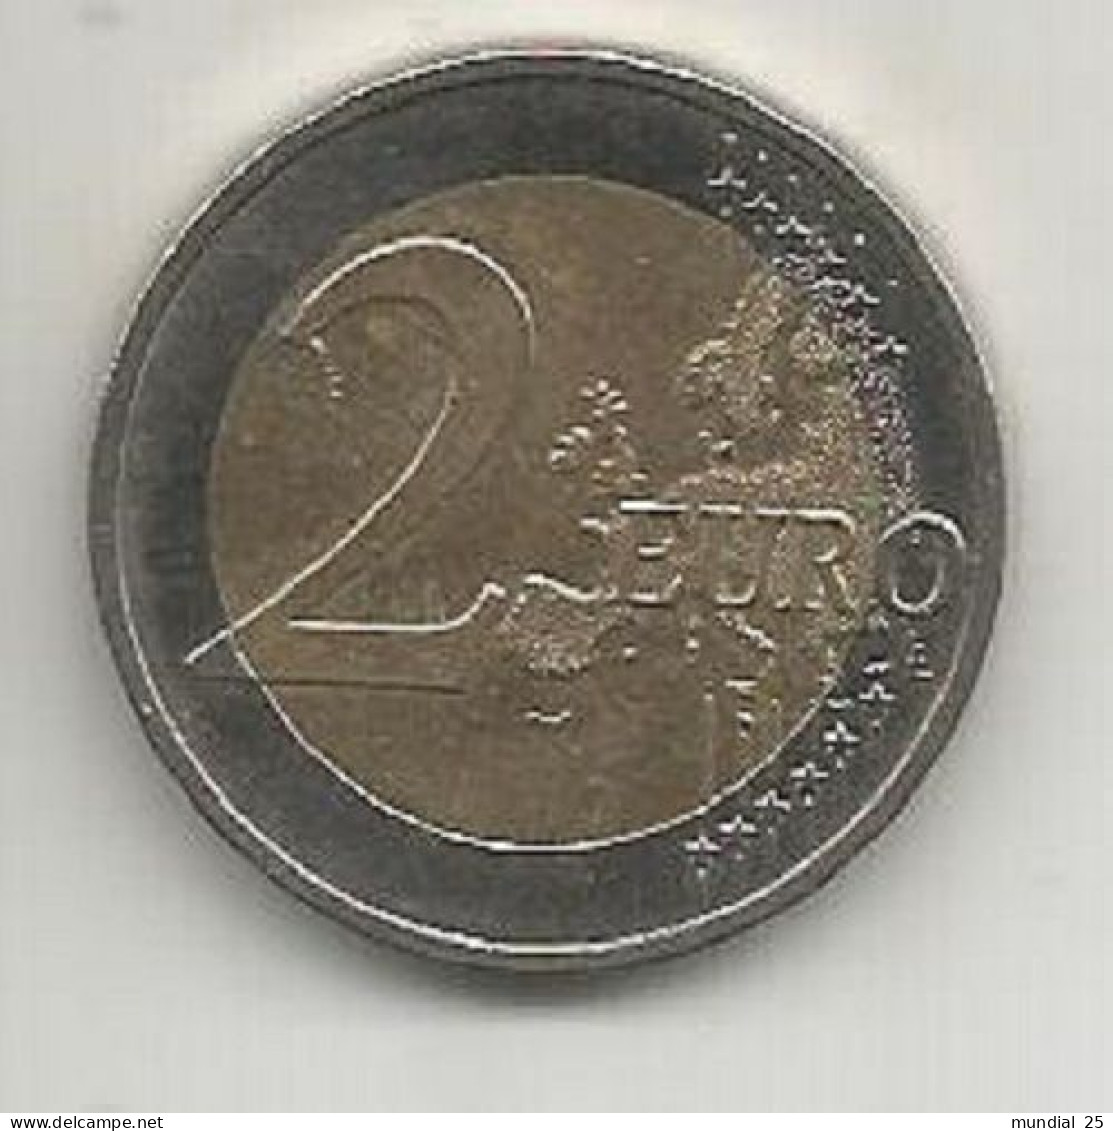 GERMANY 2 EURO 2011 (A) - COLOGNE CATHEDRAL - Duitsland